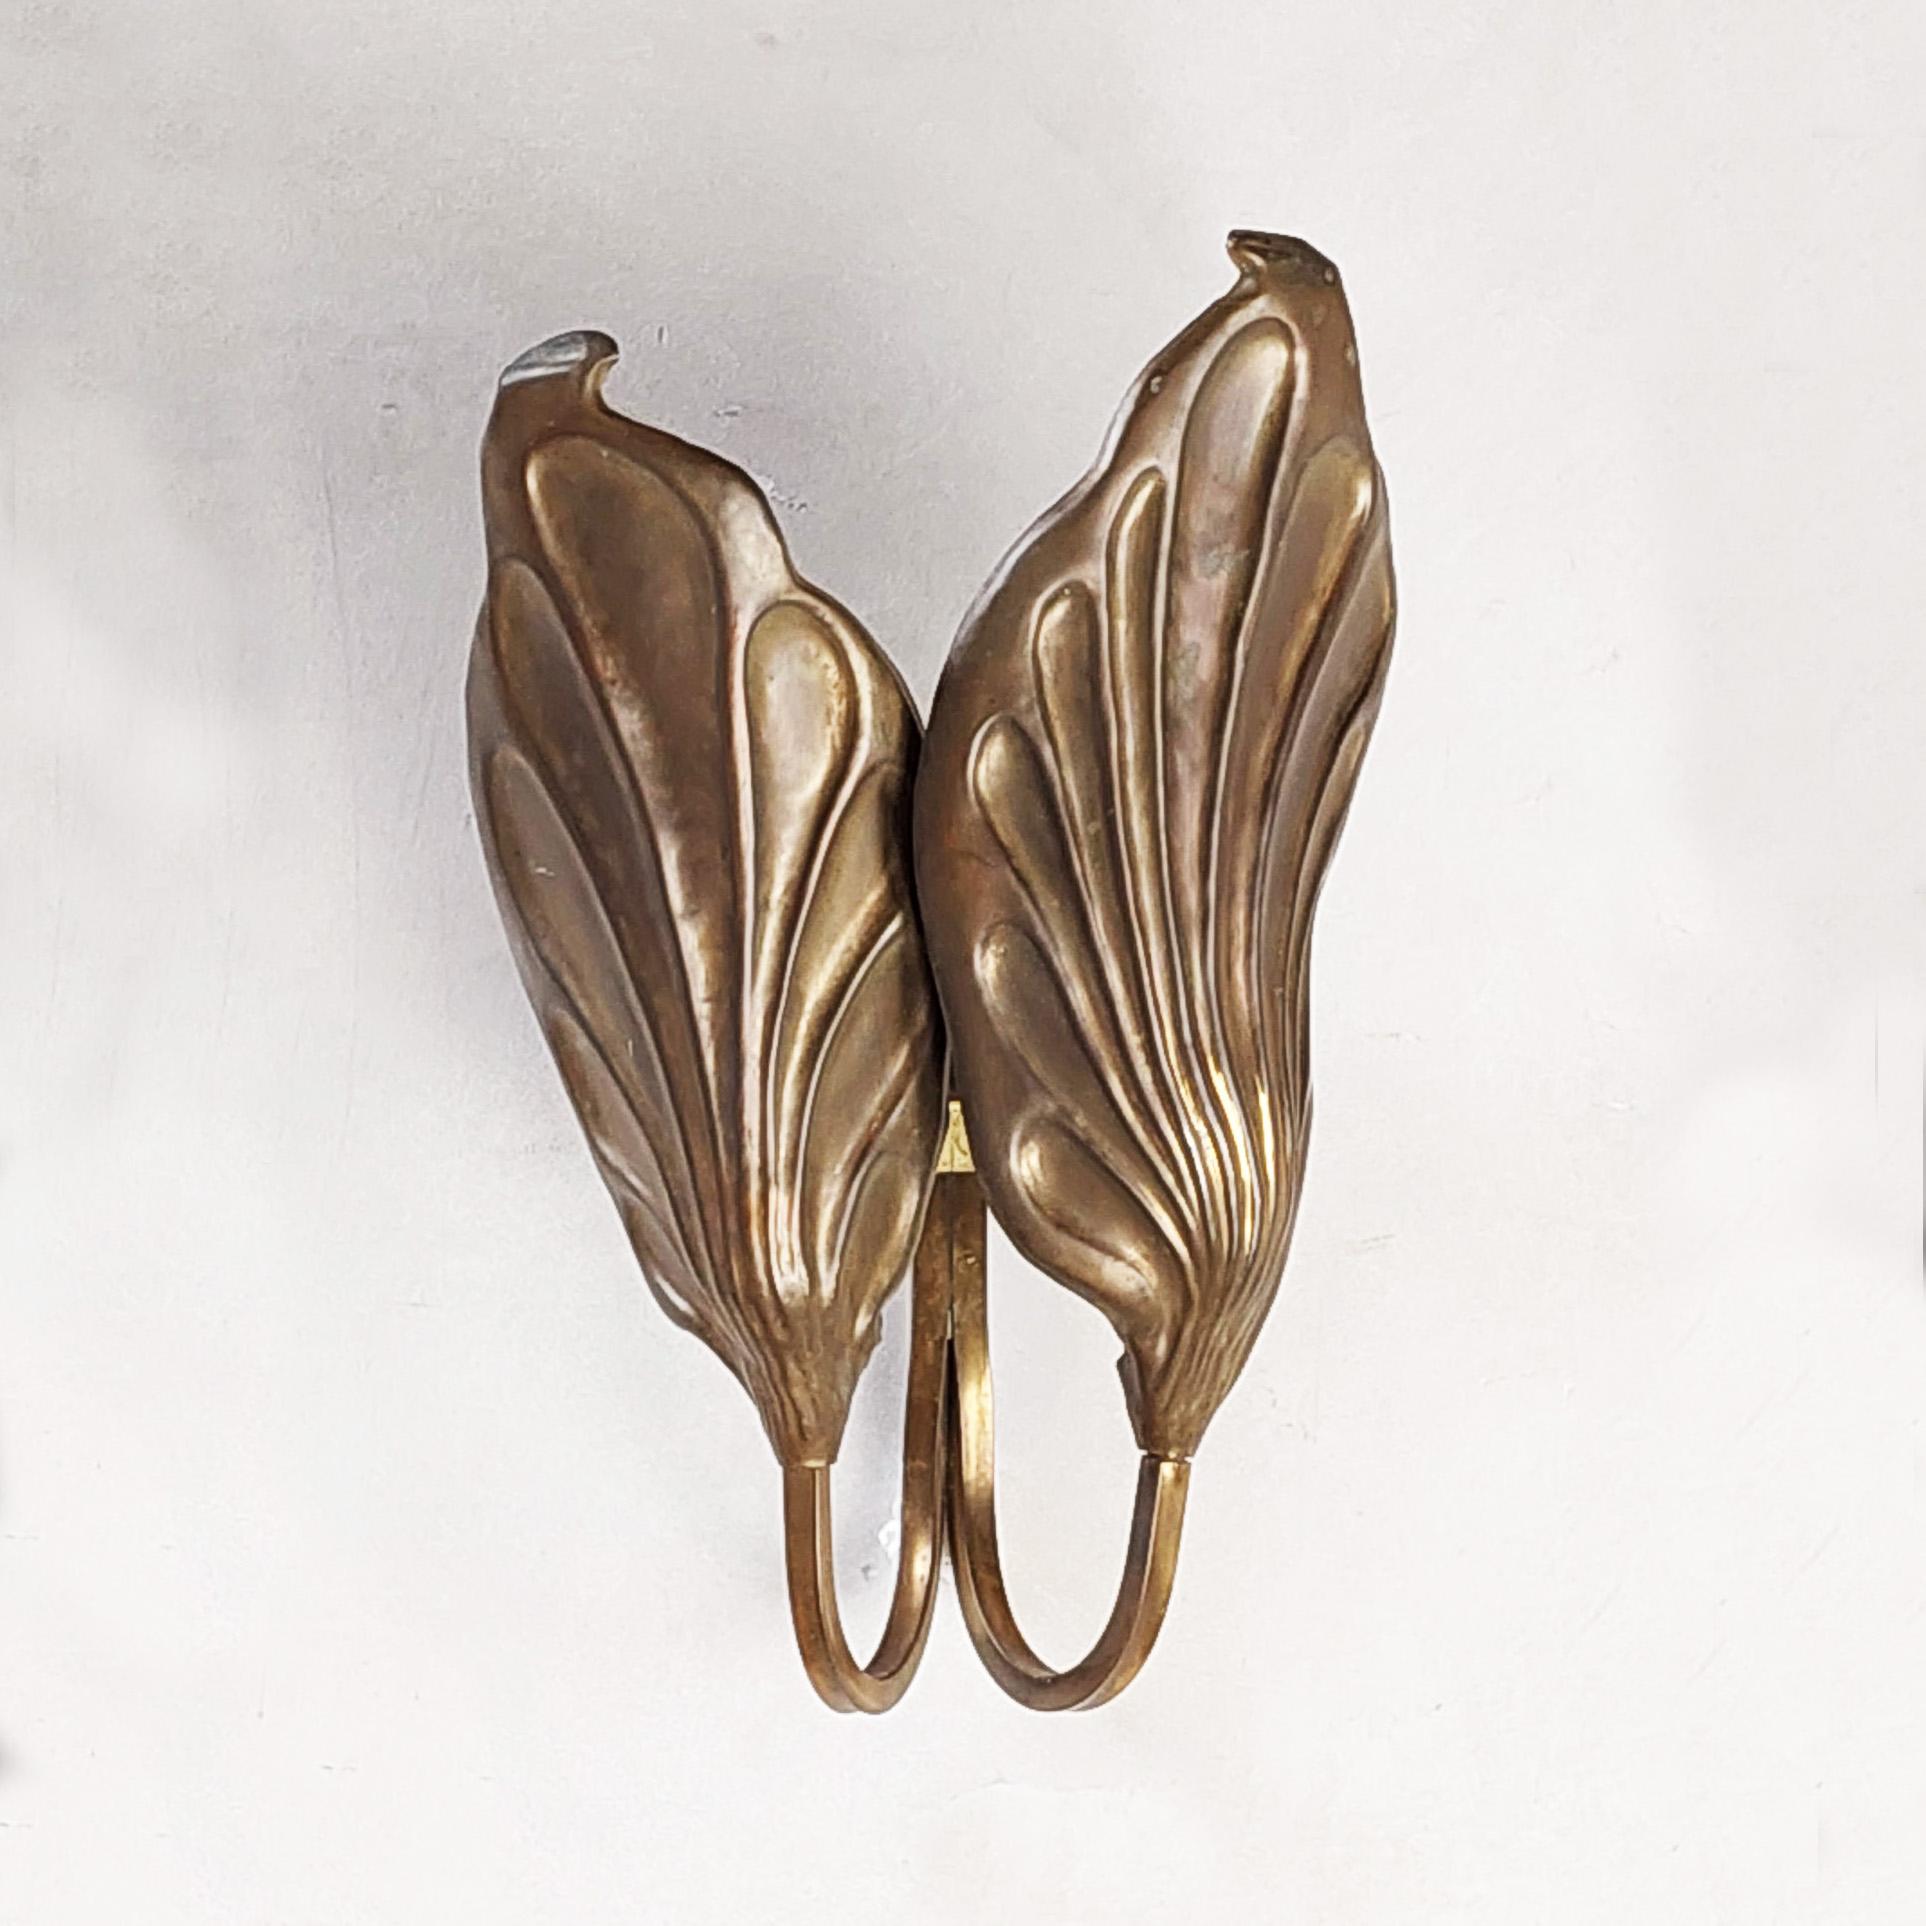 Mid-century brass double leaves wall light, sconces with leaf shaped shades. Designed by Tommaso Barbi and produced by G&G Studio e Disegno, Italy, 1960s.

Measures: H 43 X W 28 X D 13 cm.